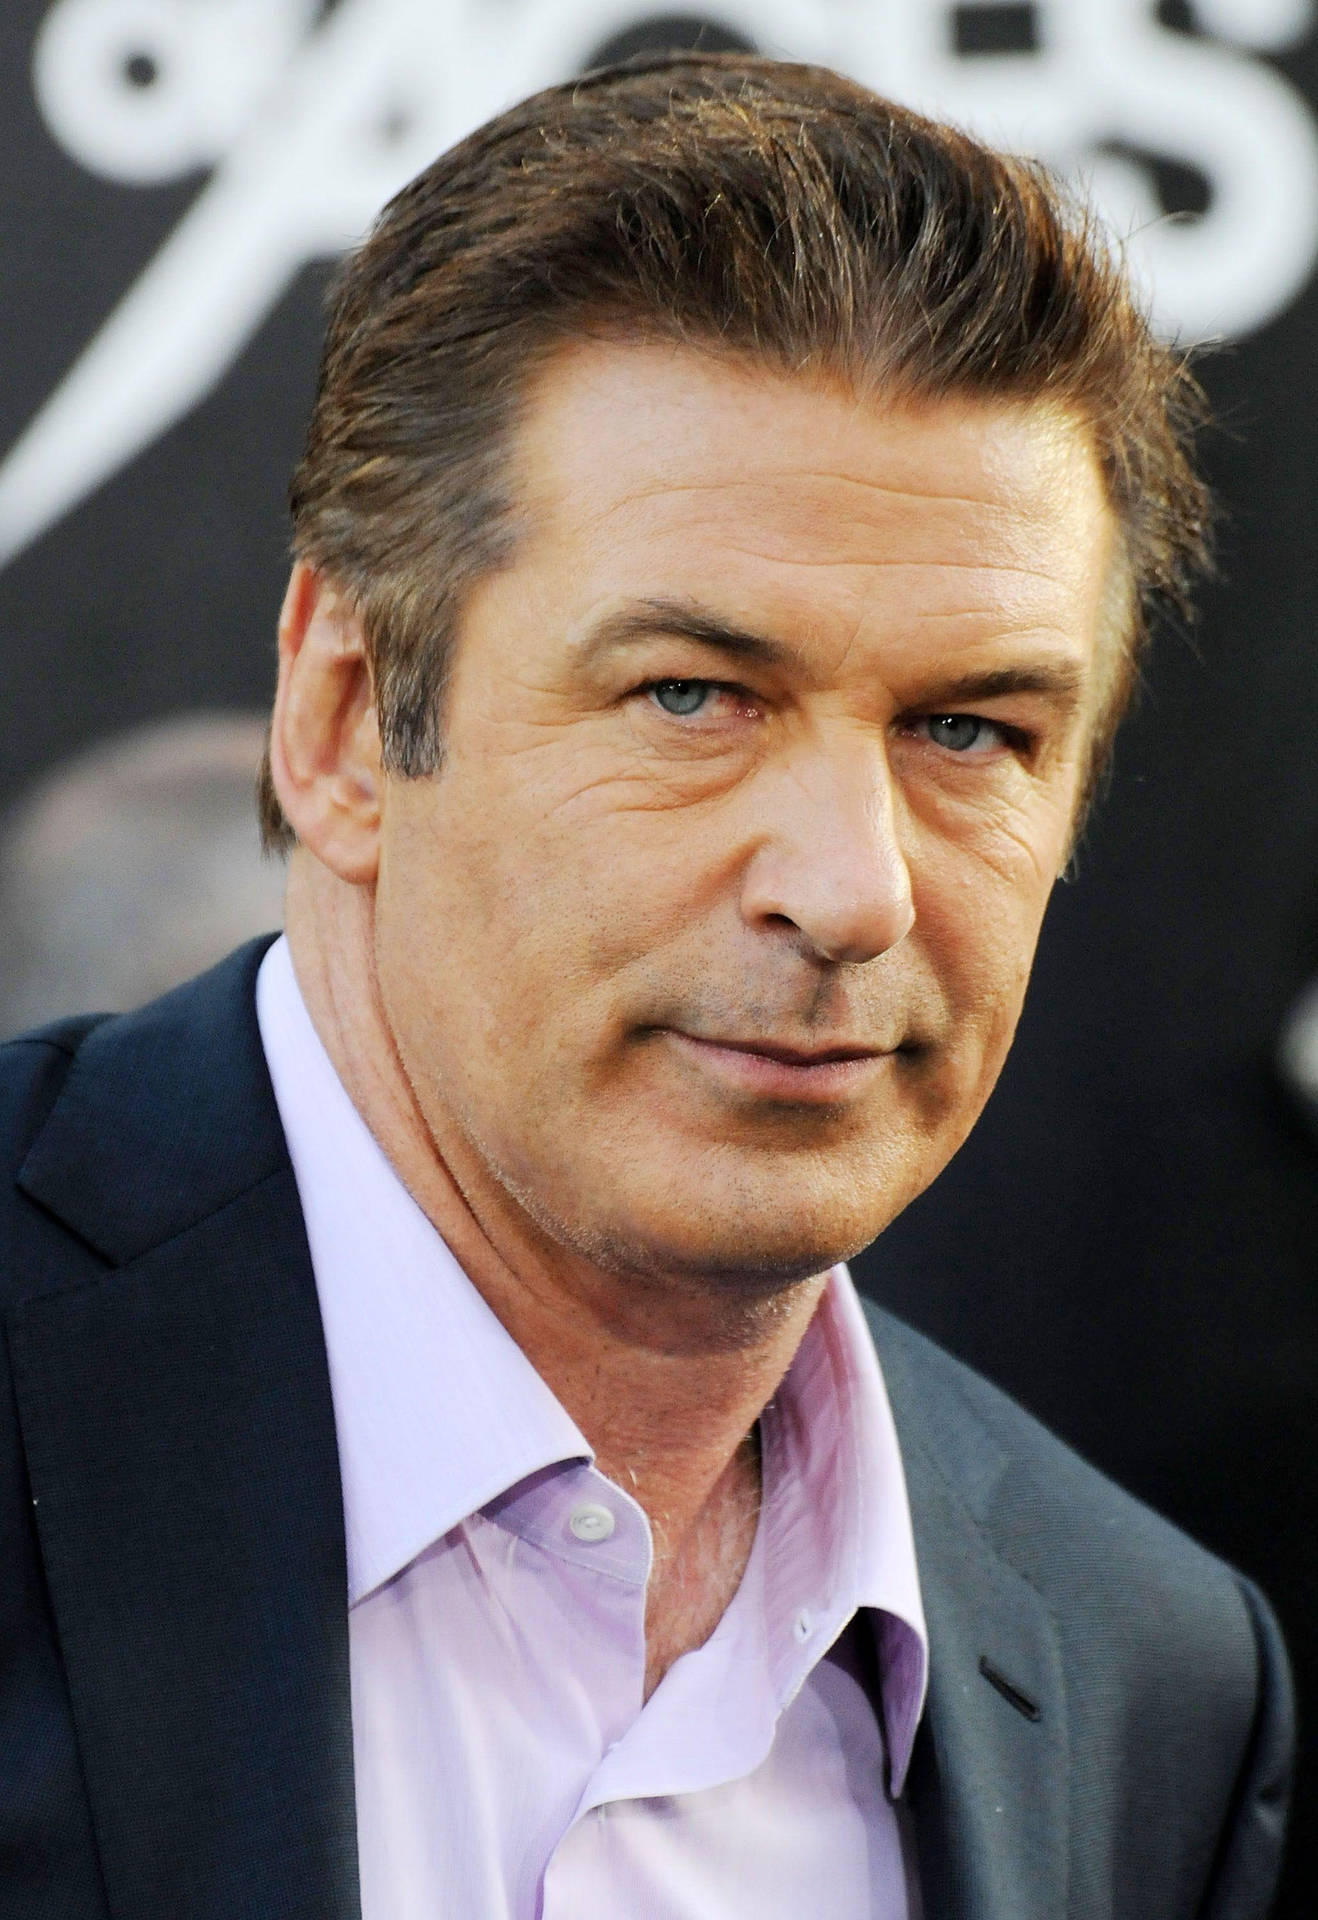 Alec Baldwin In An Event Background